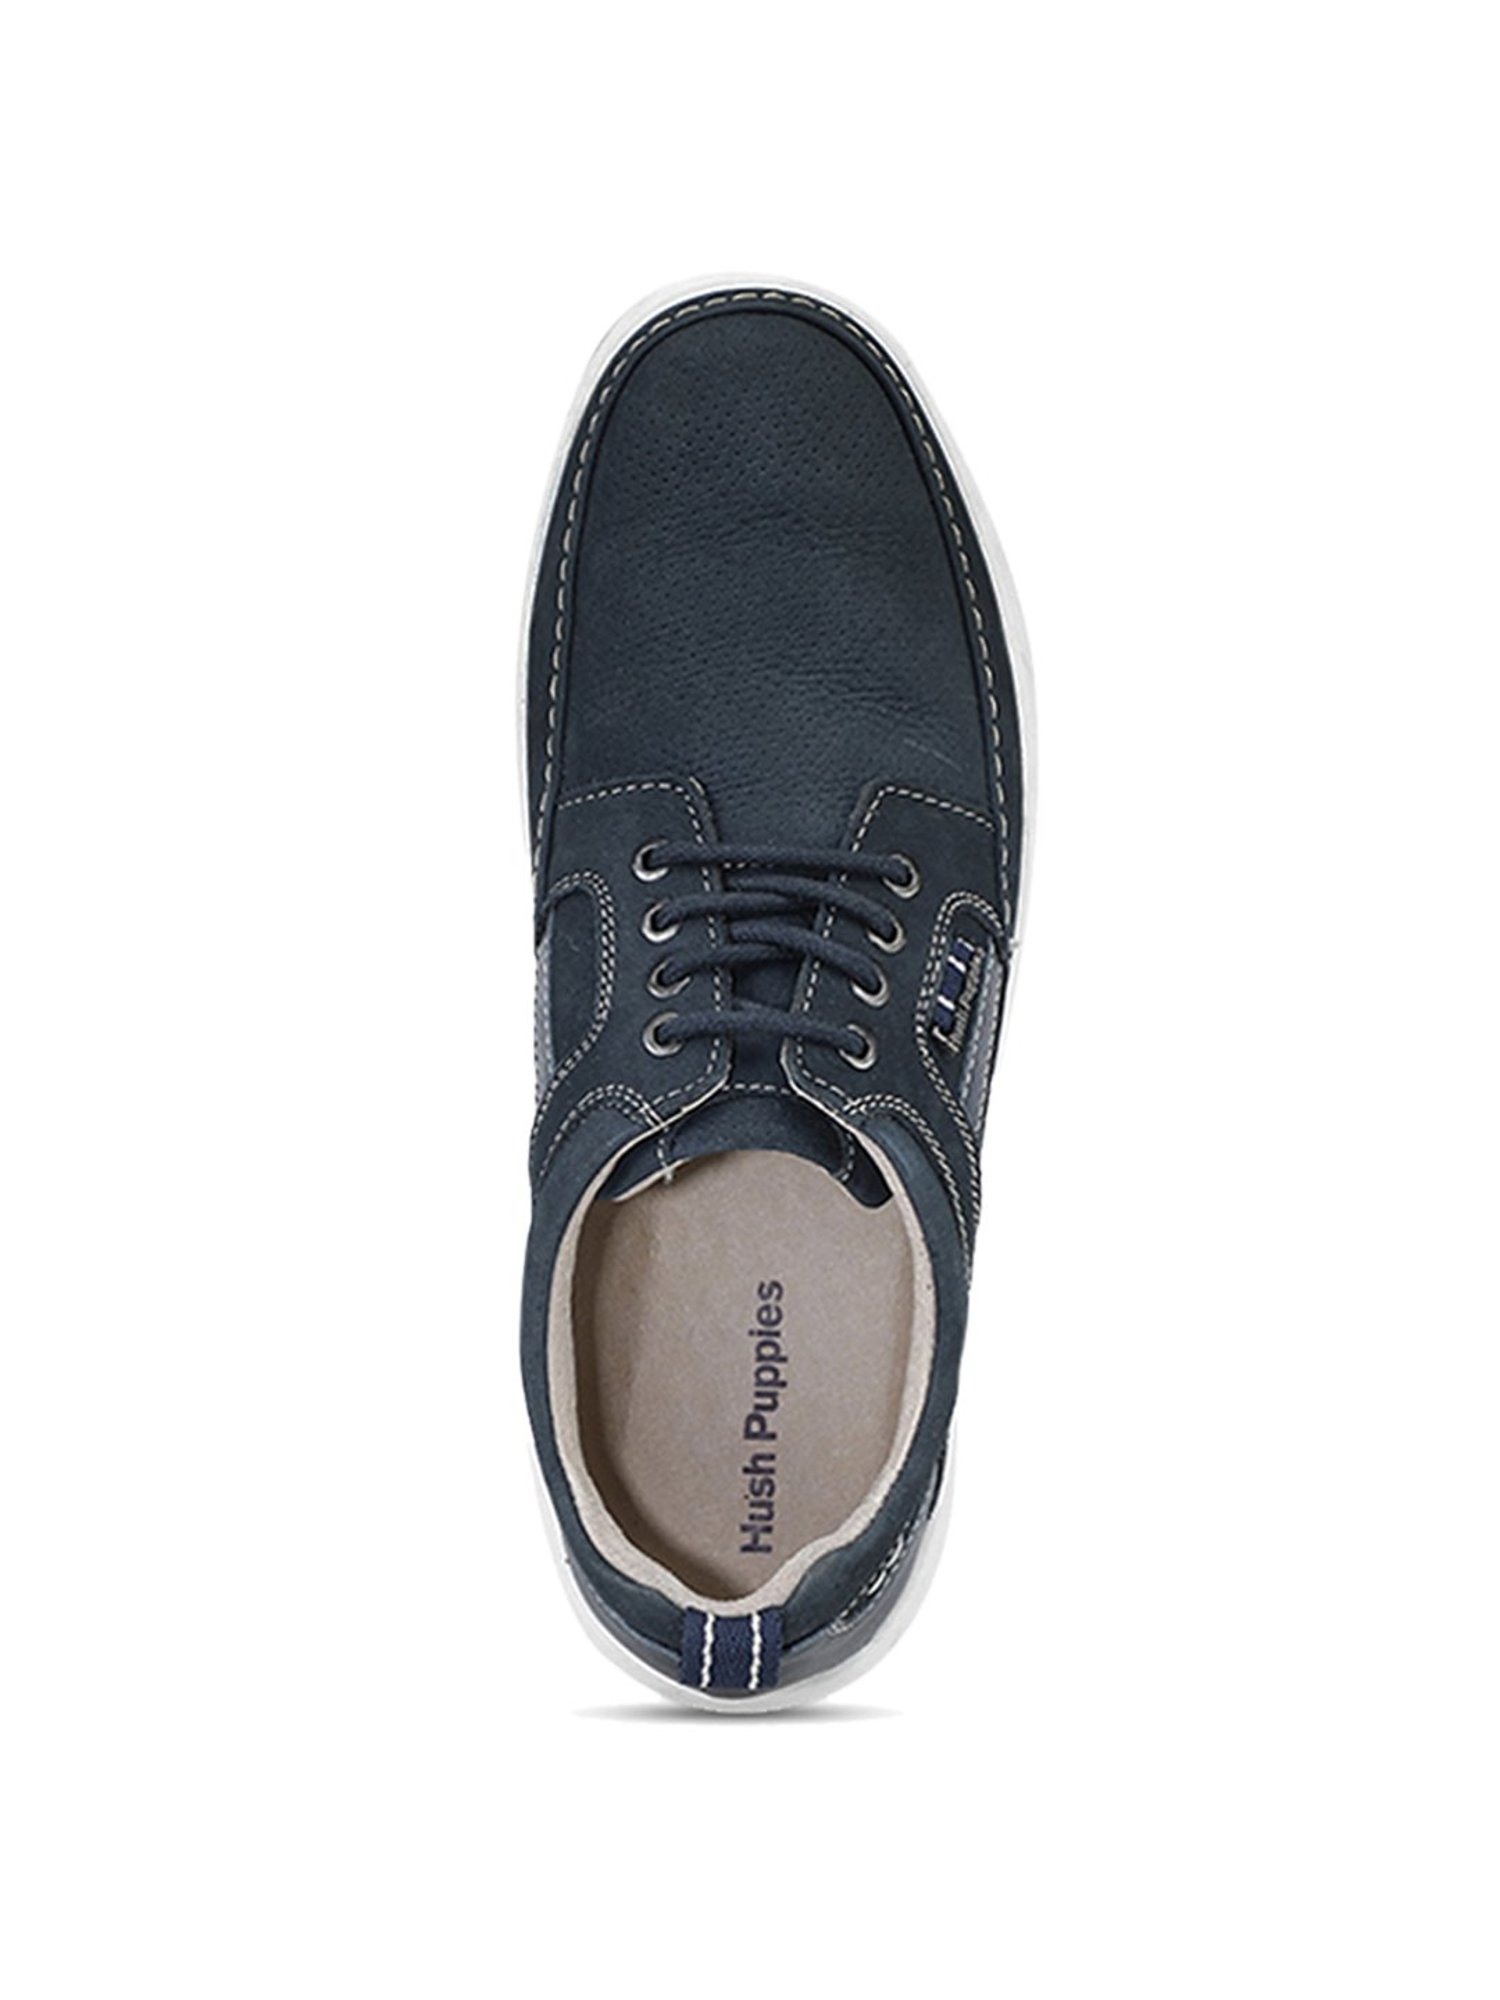 Buy Hush Puppies Colby Oxford Online India | Ubuy